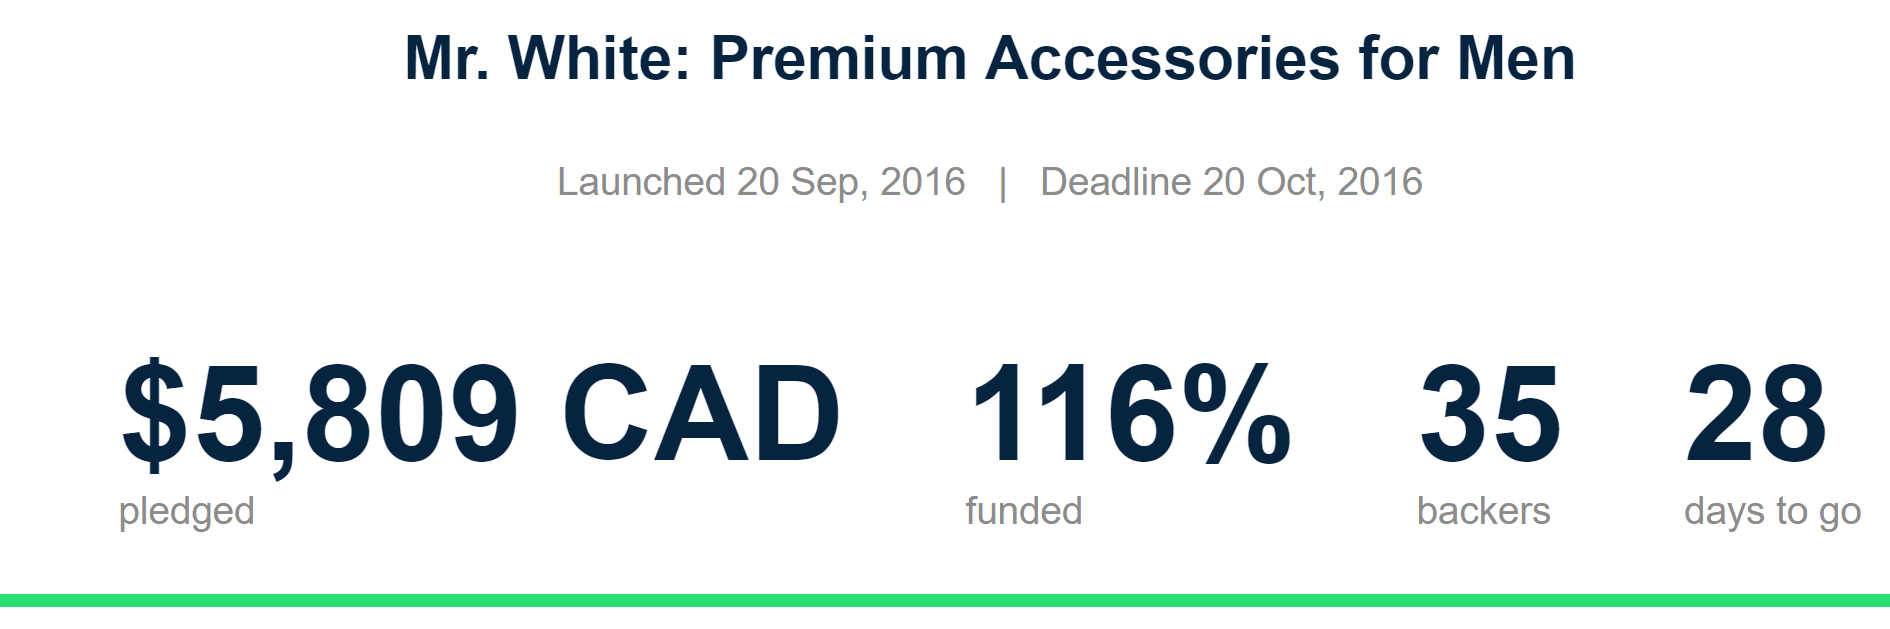 +100% funded first day on Kickstarter? WOW! What else can we say?